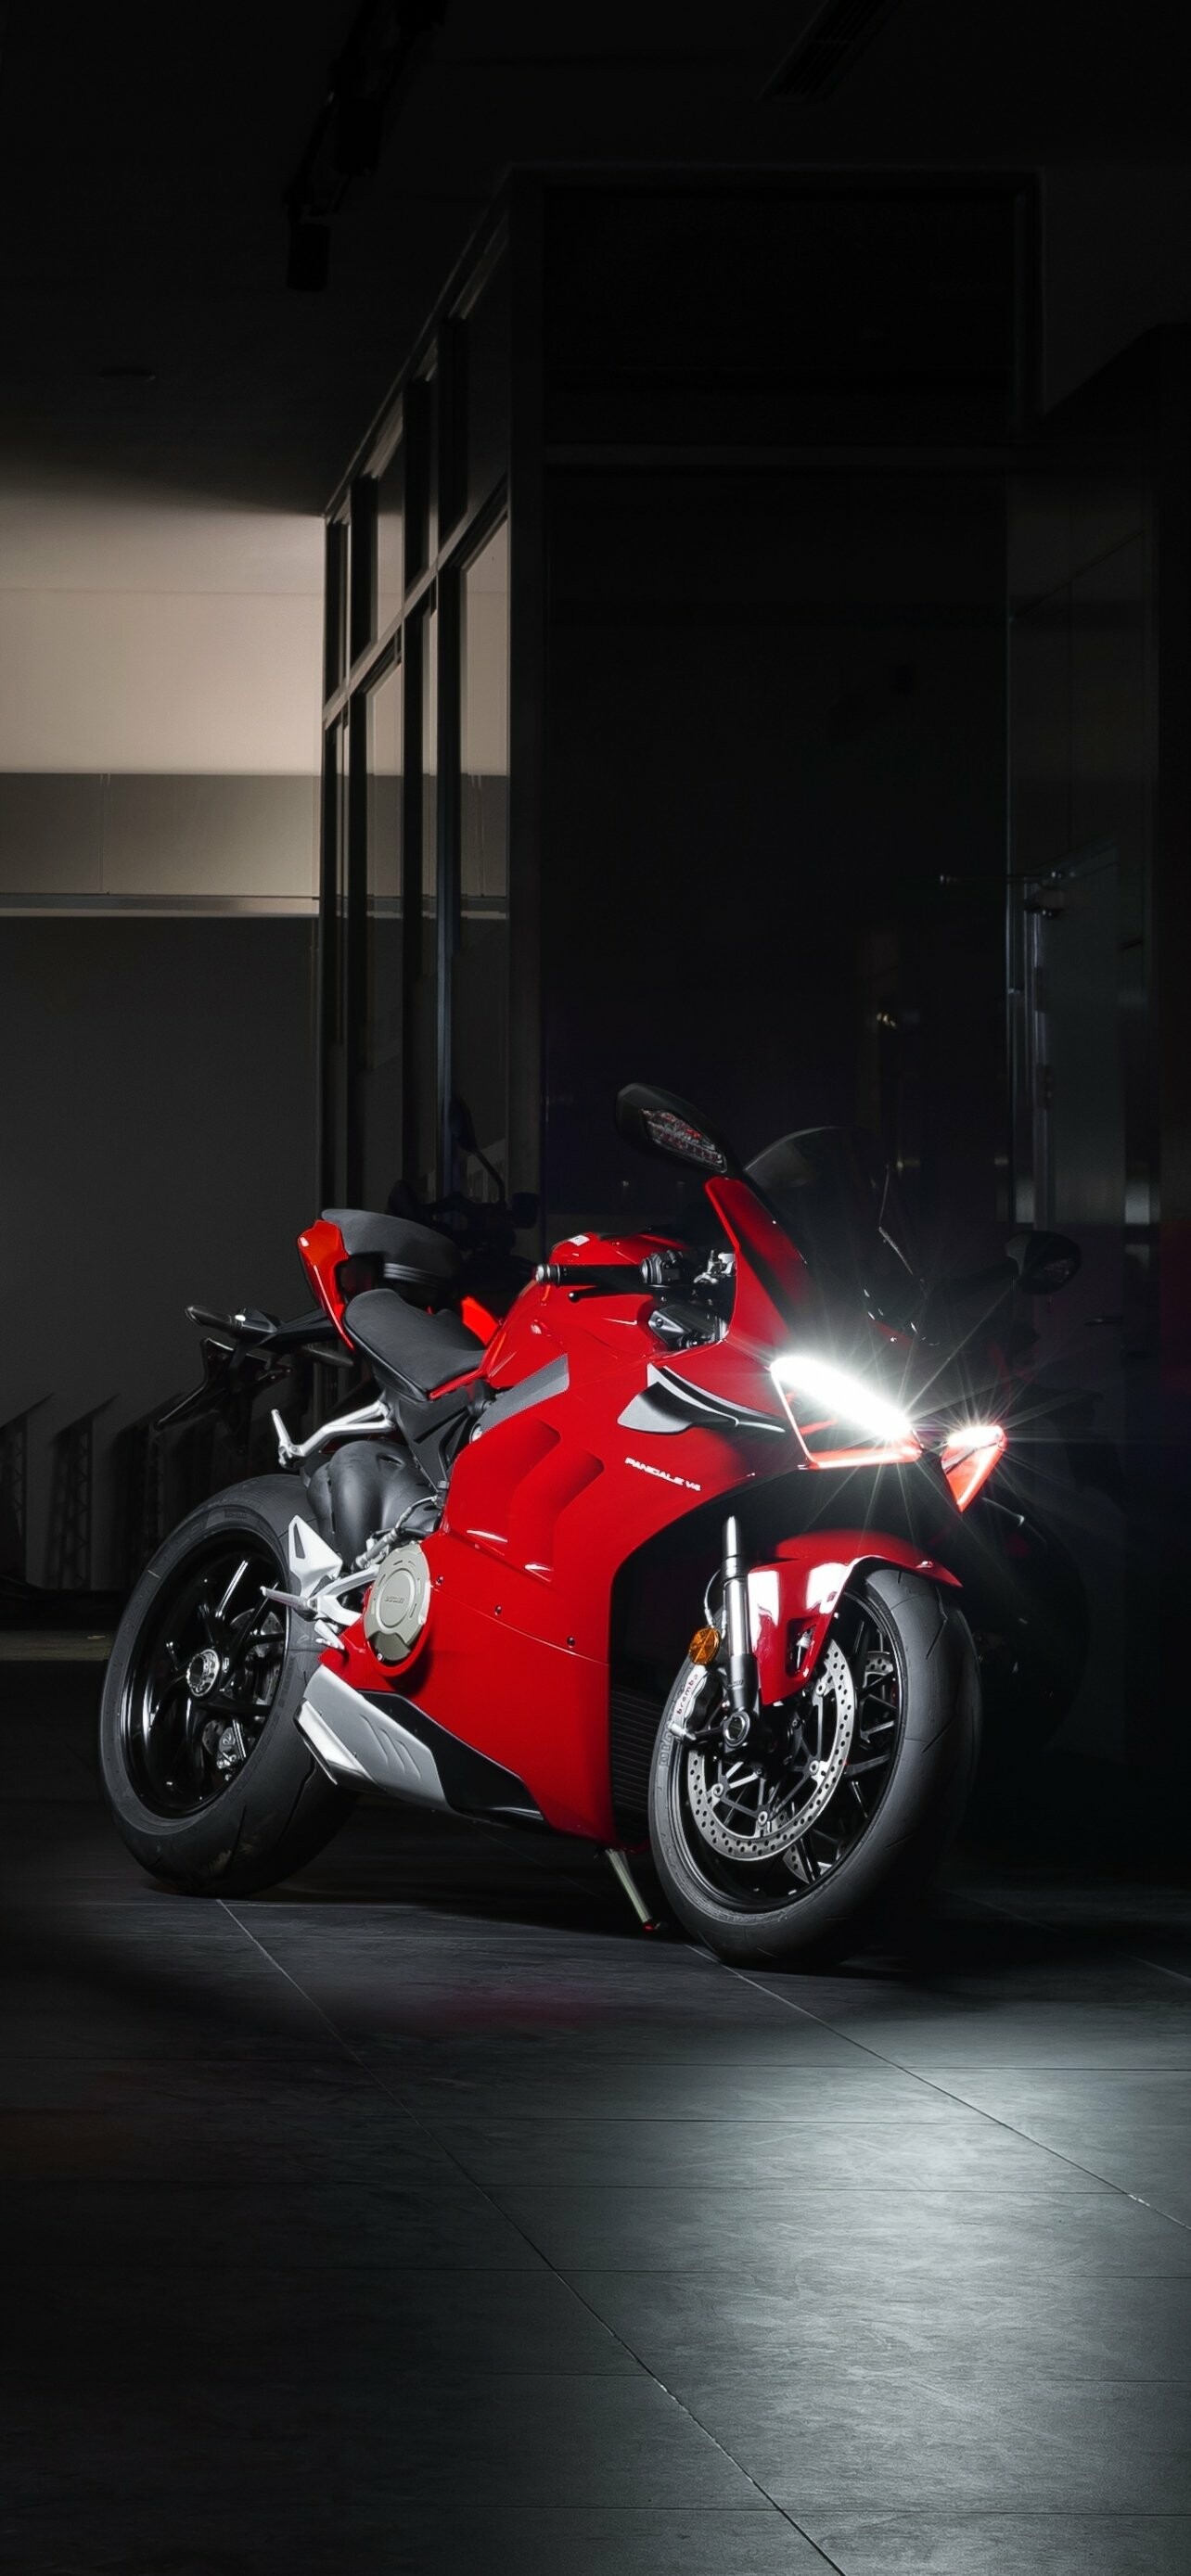 Ducati: Vehicles, Panigale V4, Introduced a revolutionary carbon fiber frame for the Desmosedici GP9. 1290x2780 HD Background.